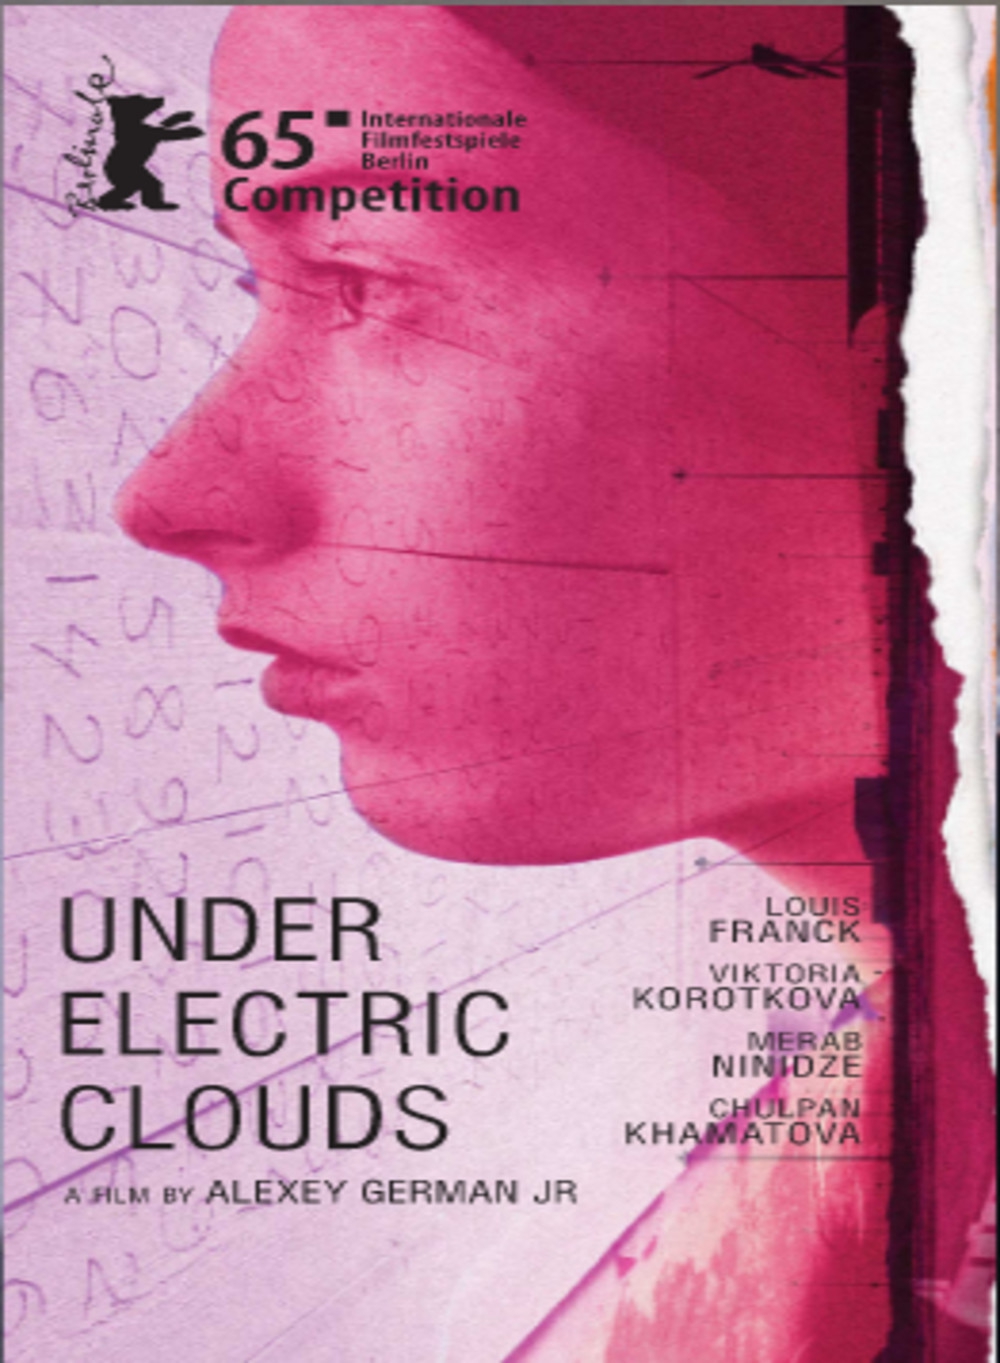  Under Electric Clouds (2015) Poster 